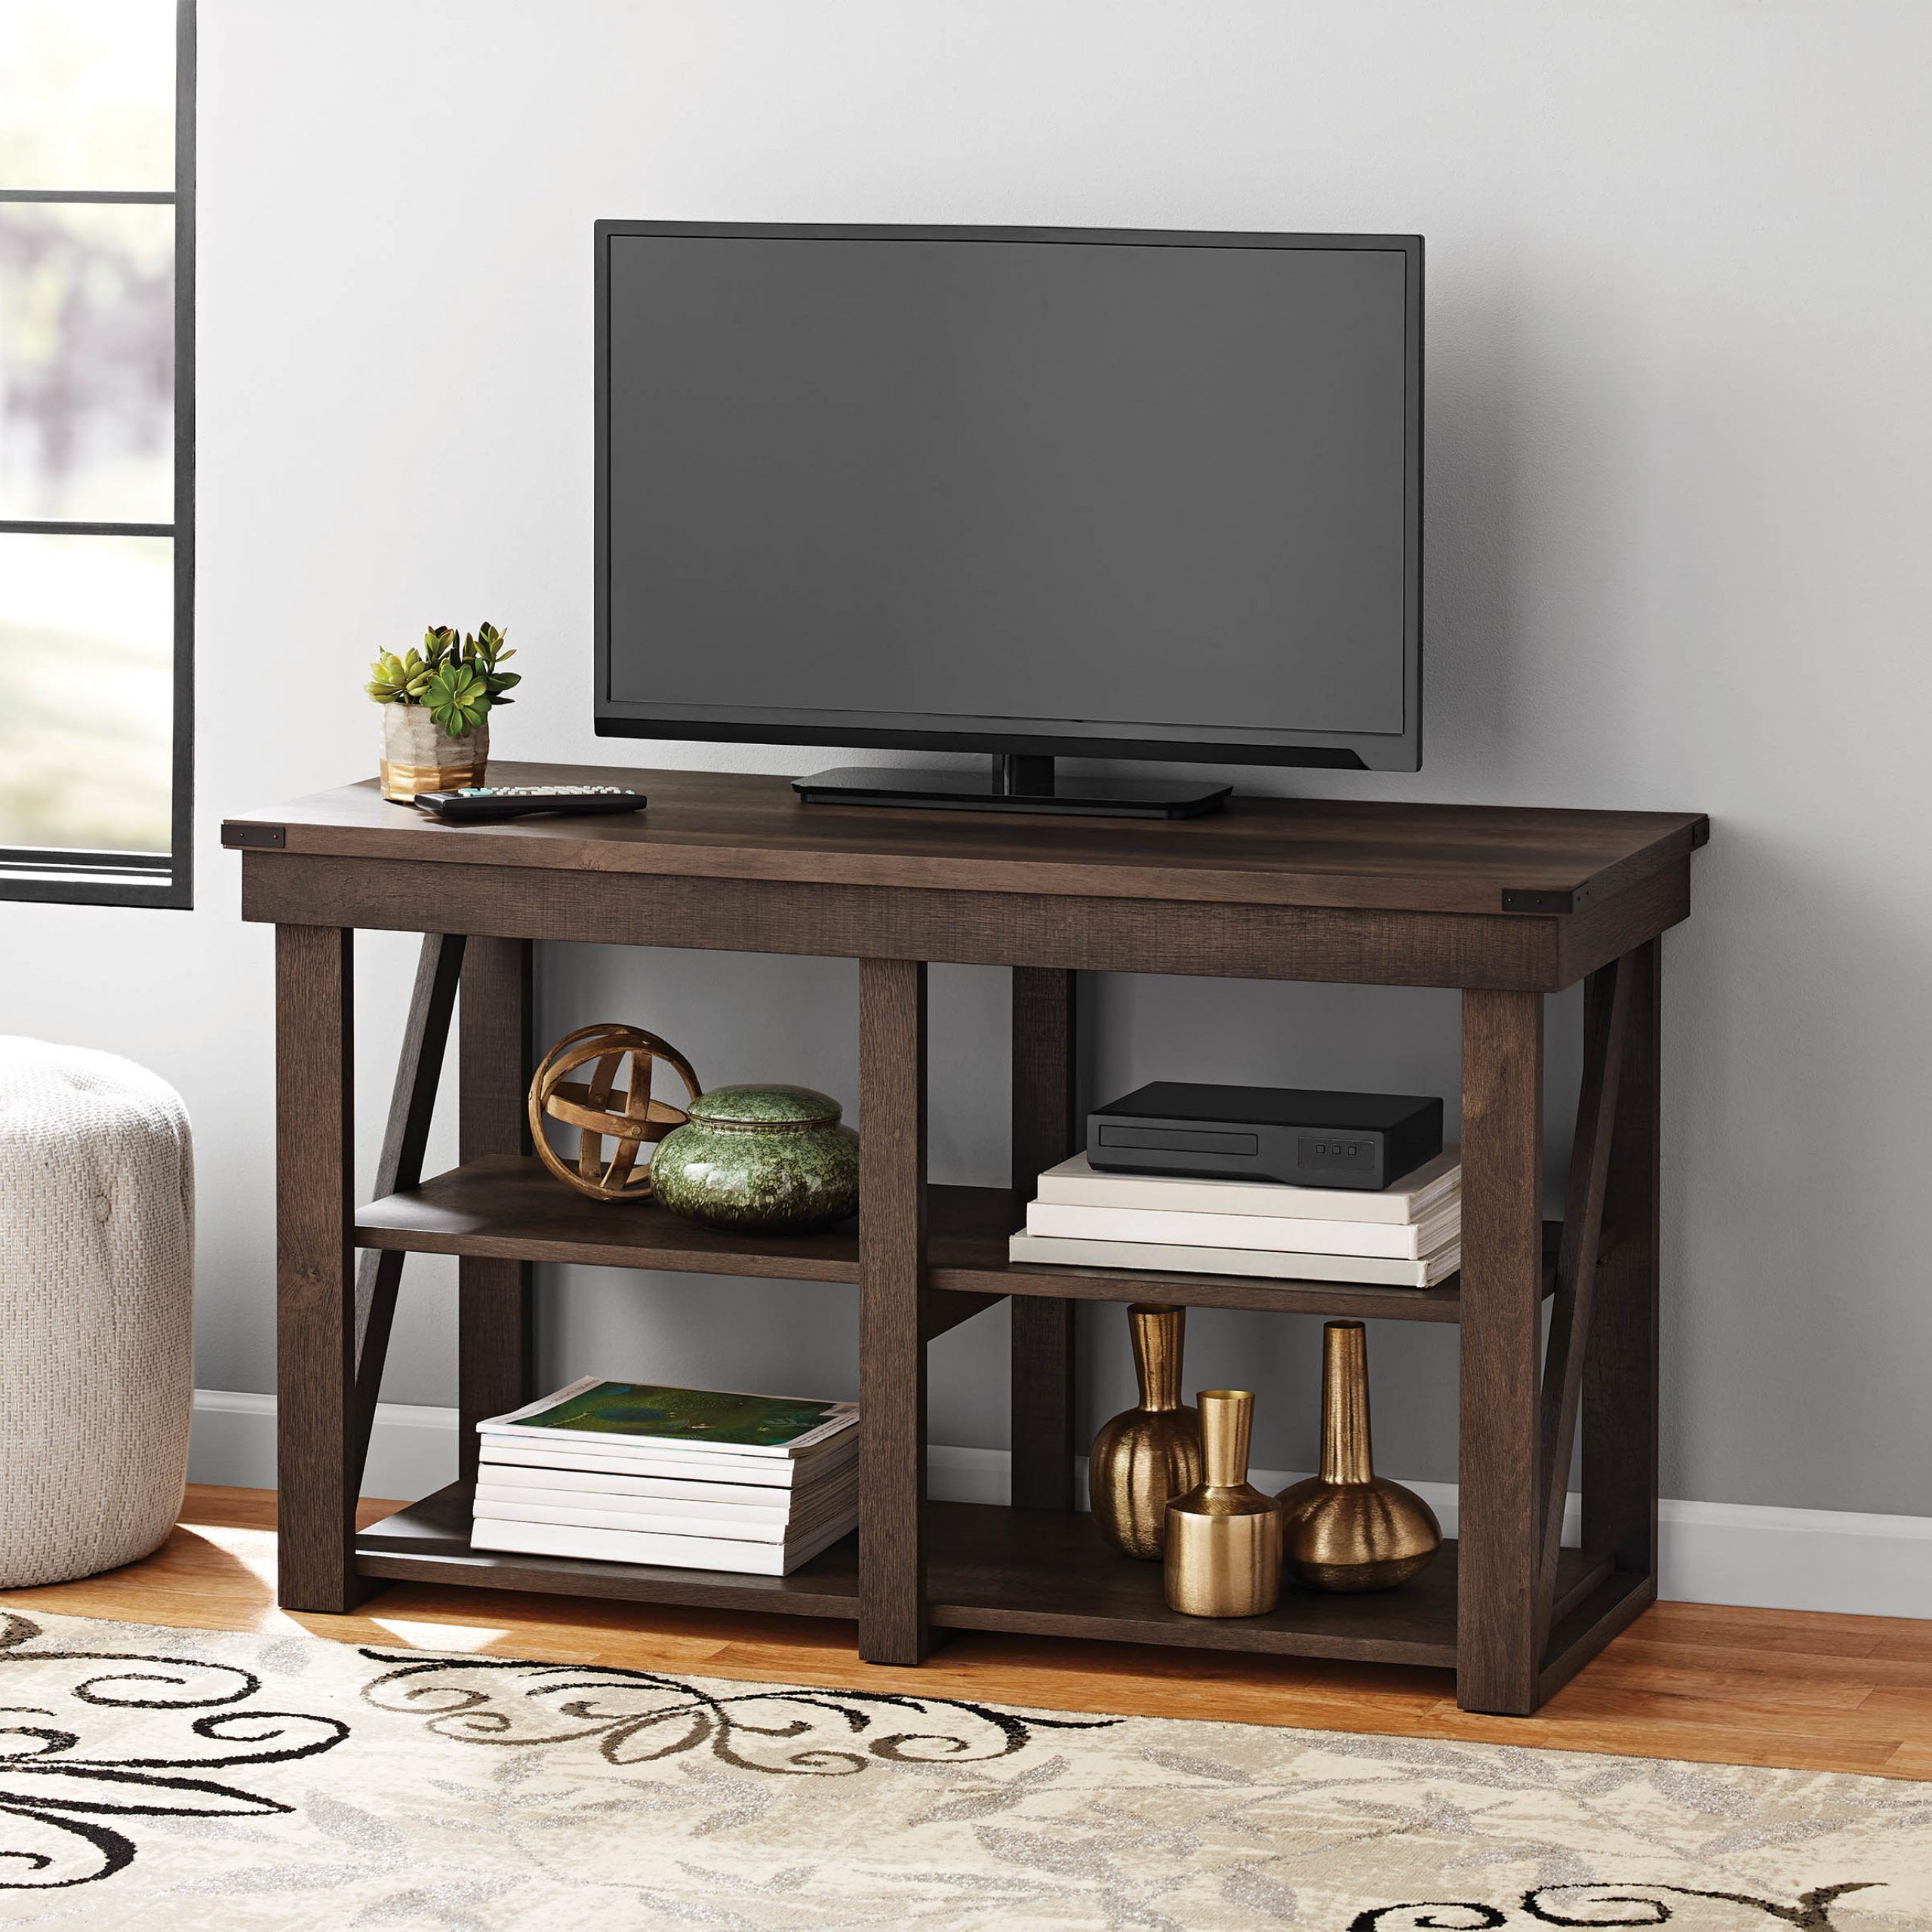 Flat Screen Tv Stand At Walmart — Shermanscreek Within Whalen Shelf Tv Stands With Floater Mount In Weathered Dark Pine Finish (View 3 of 15)